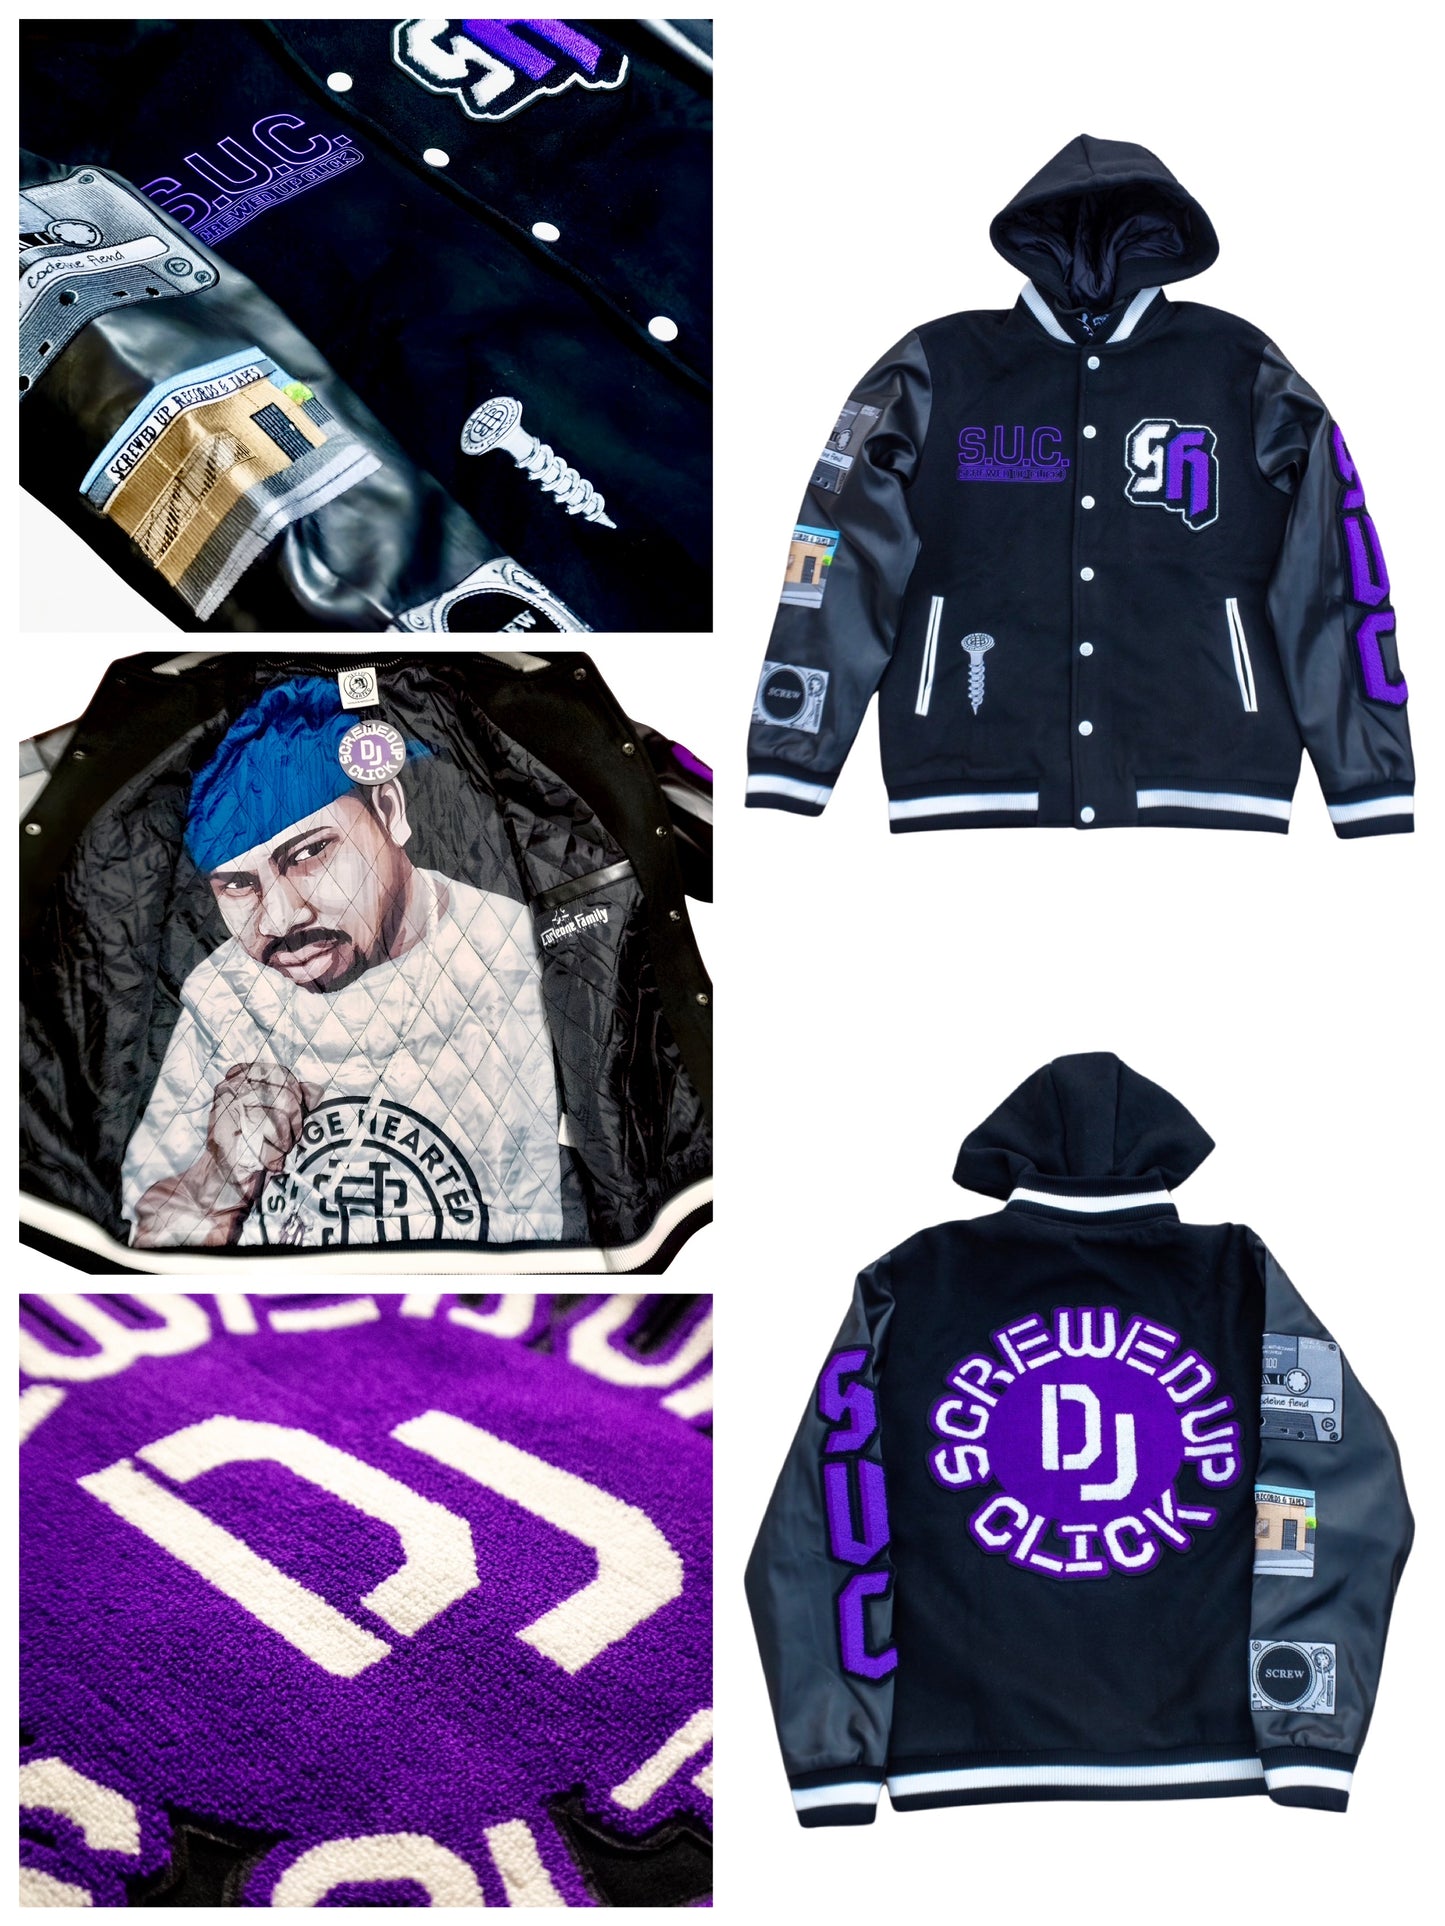 Savage Hearted & Screwed Up Click Collaboration Varsity Jacket